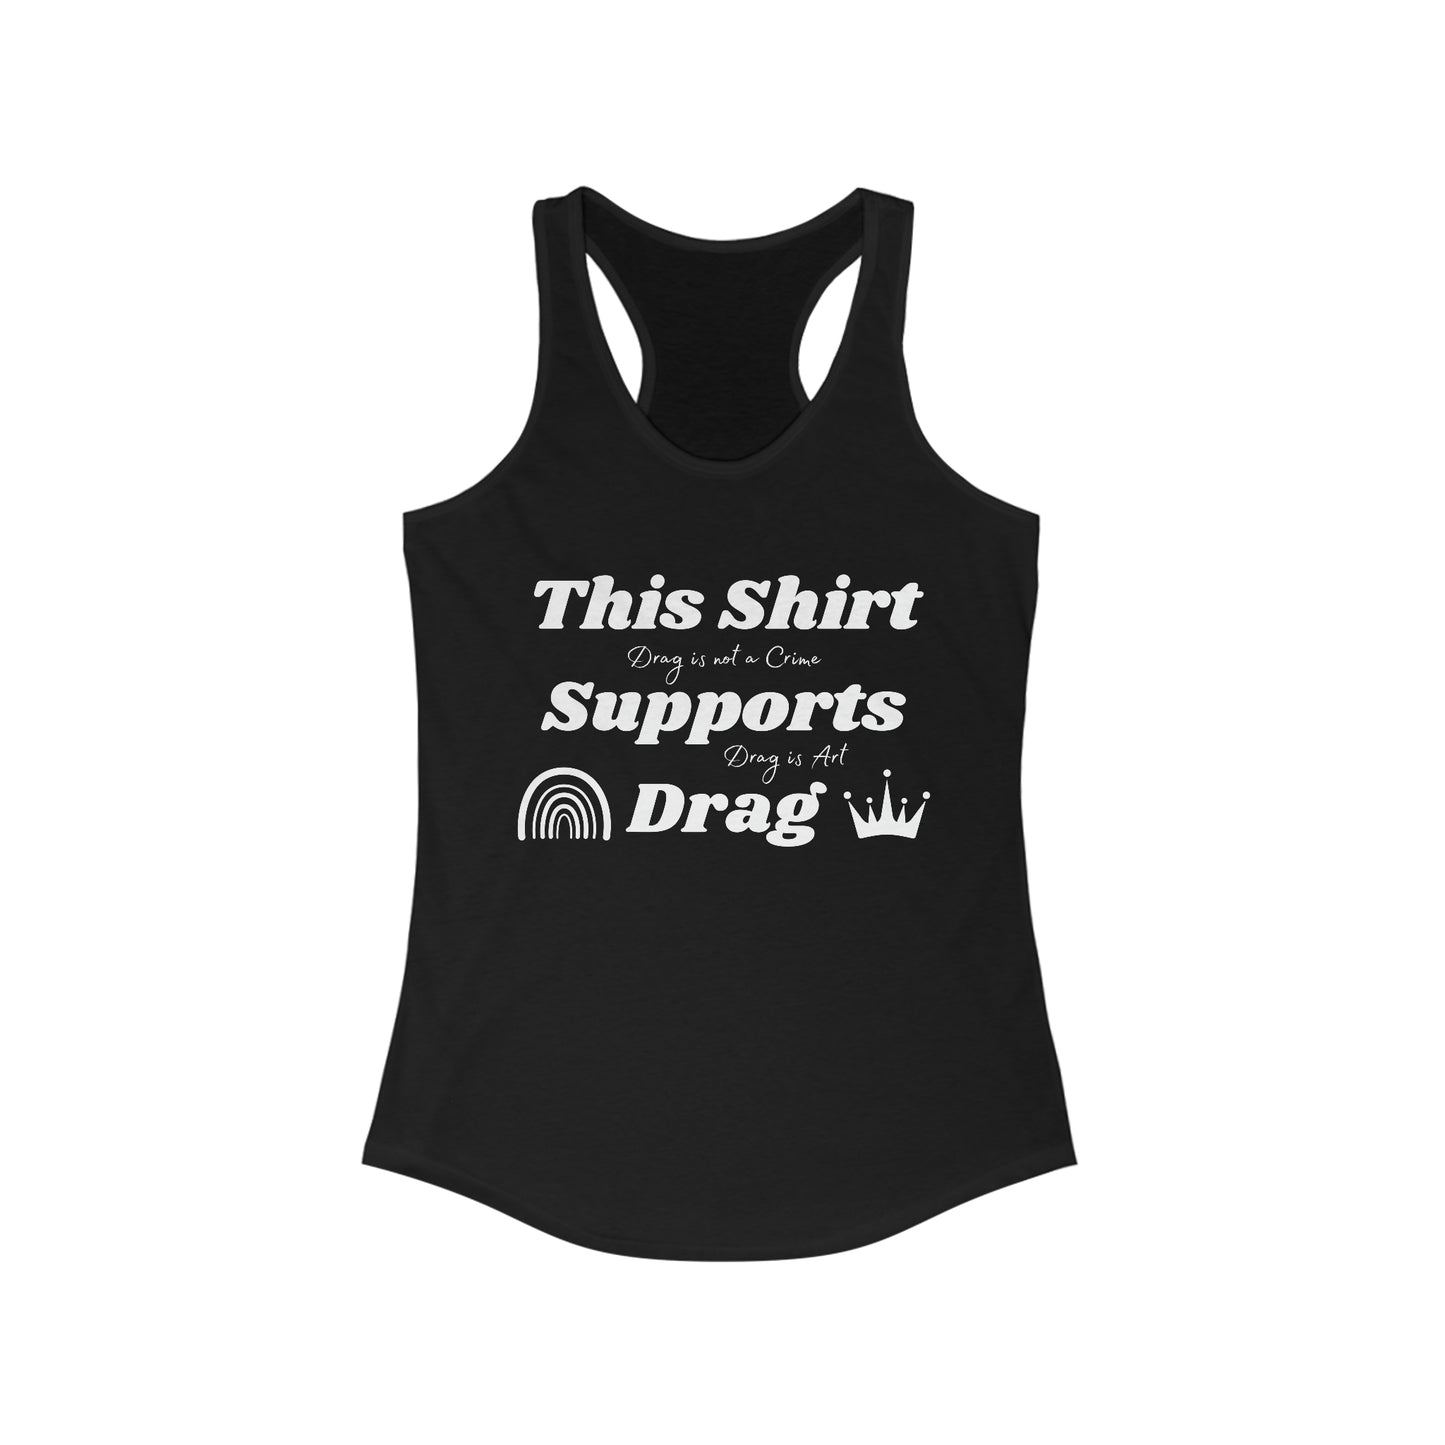 This Shirt Supports Drag Tank Top